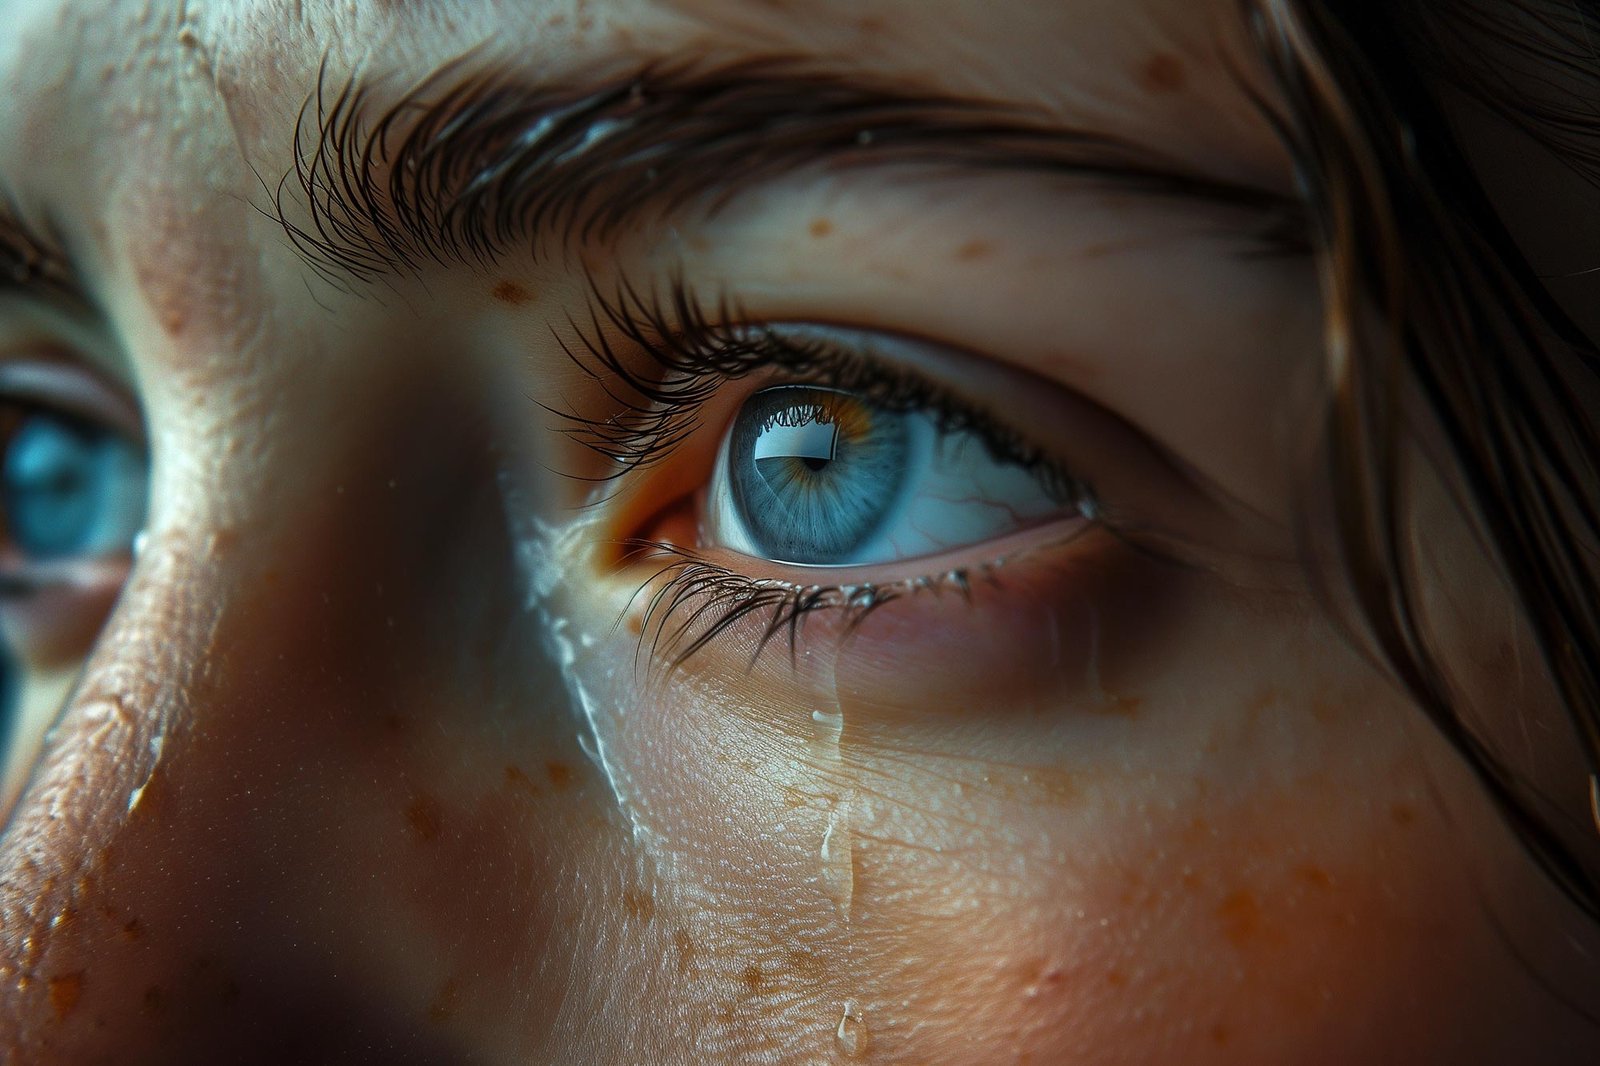 Sniffing Women’s Tears Reduces Male Aggression